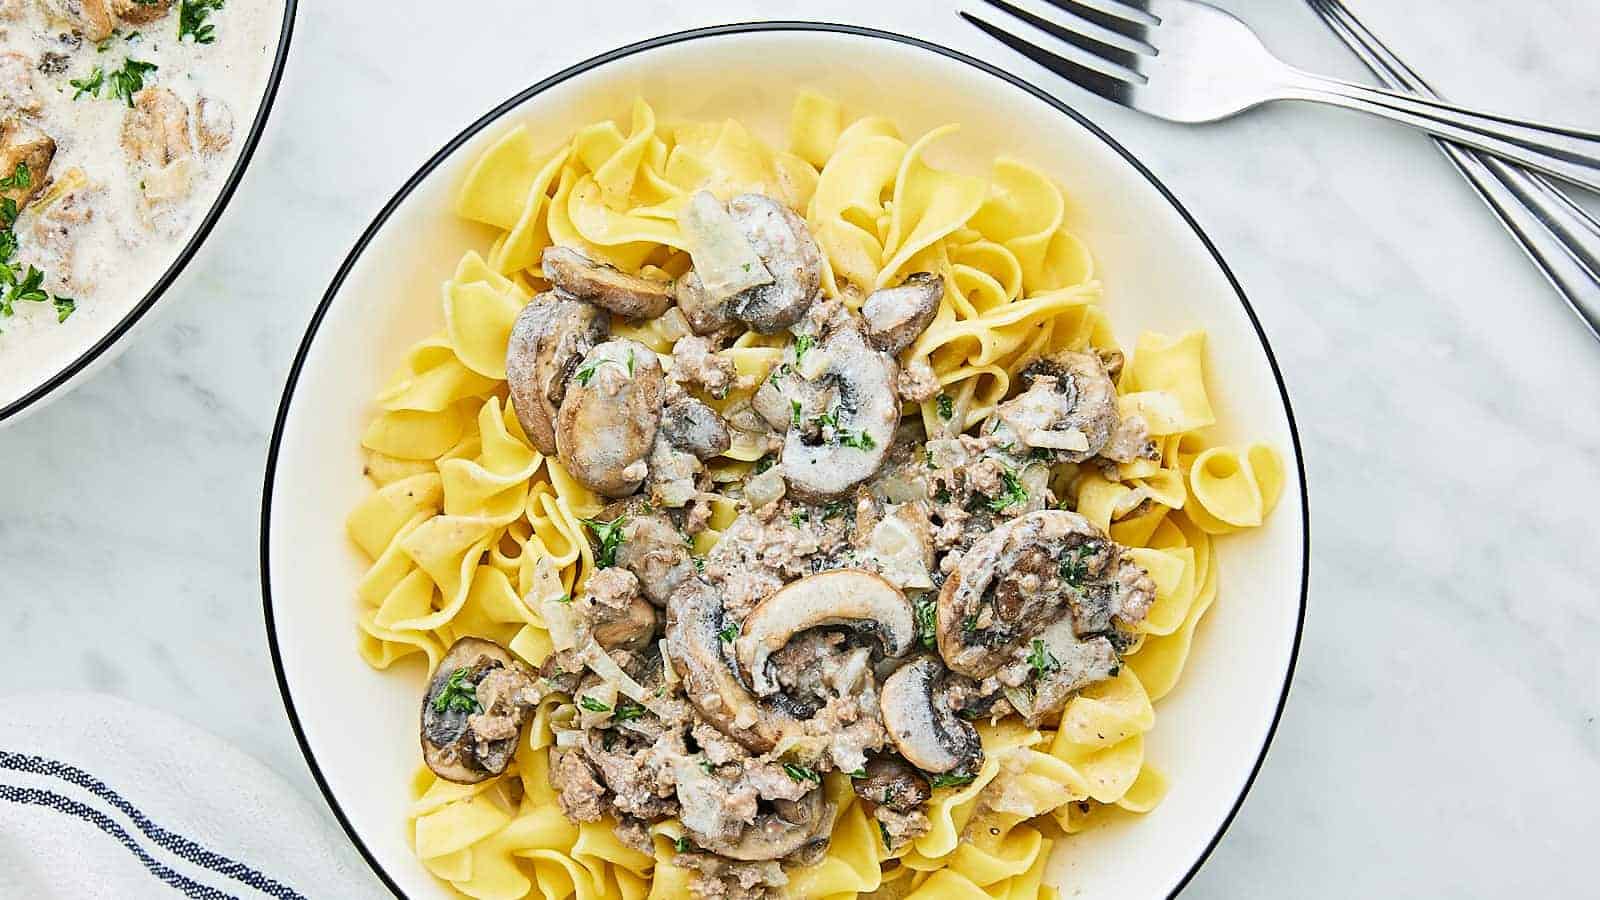 Beef stroganoff on noodles in a white bowl.